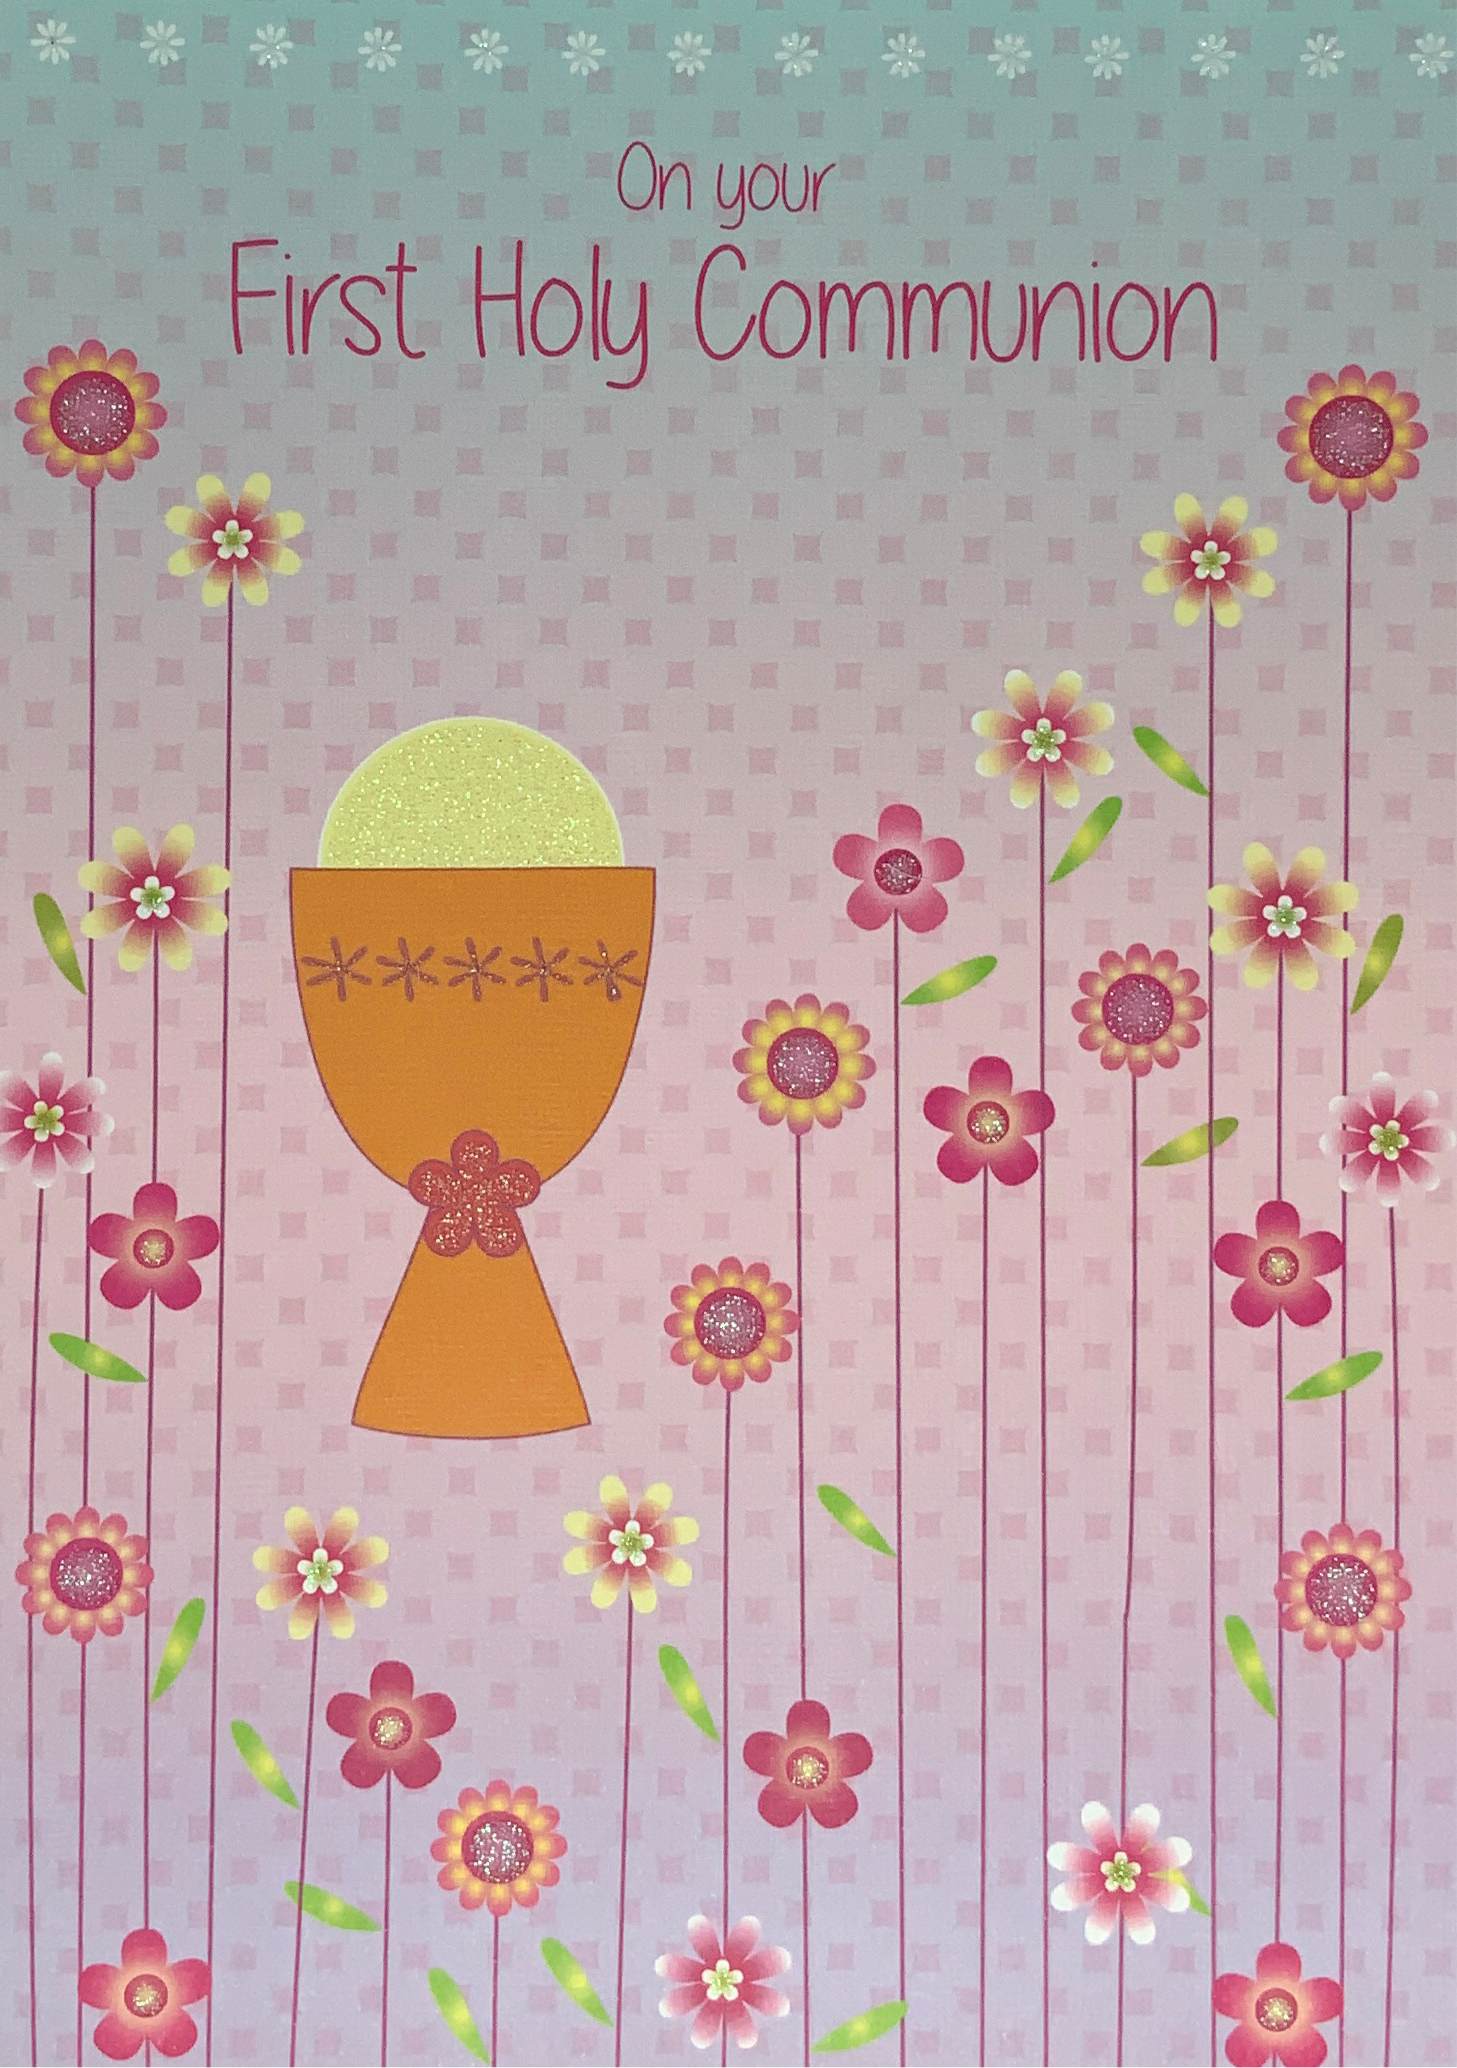 Communion Card - With Every Best Wishes